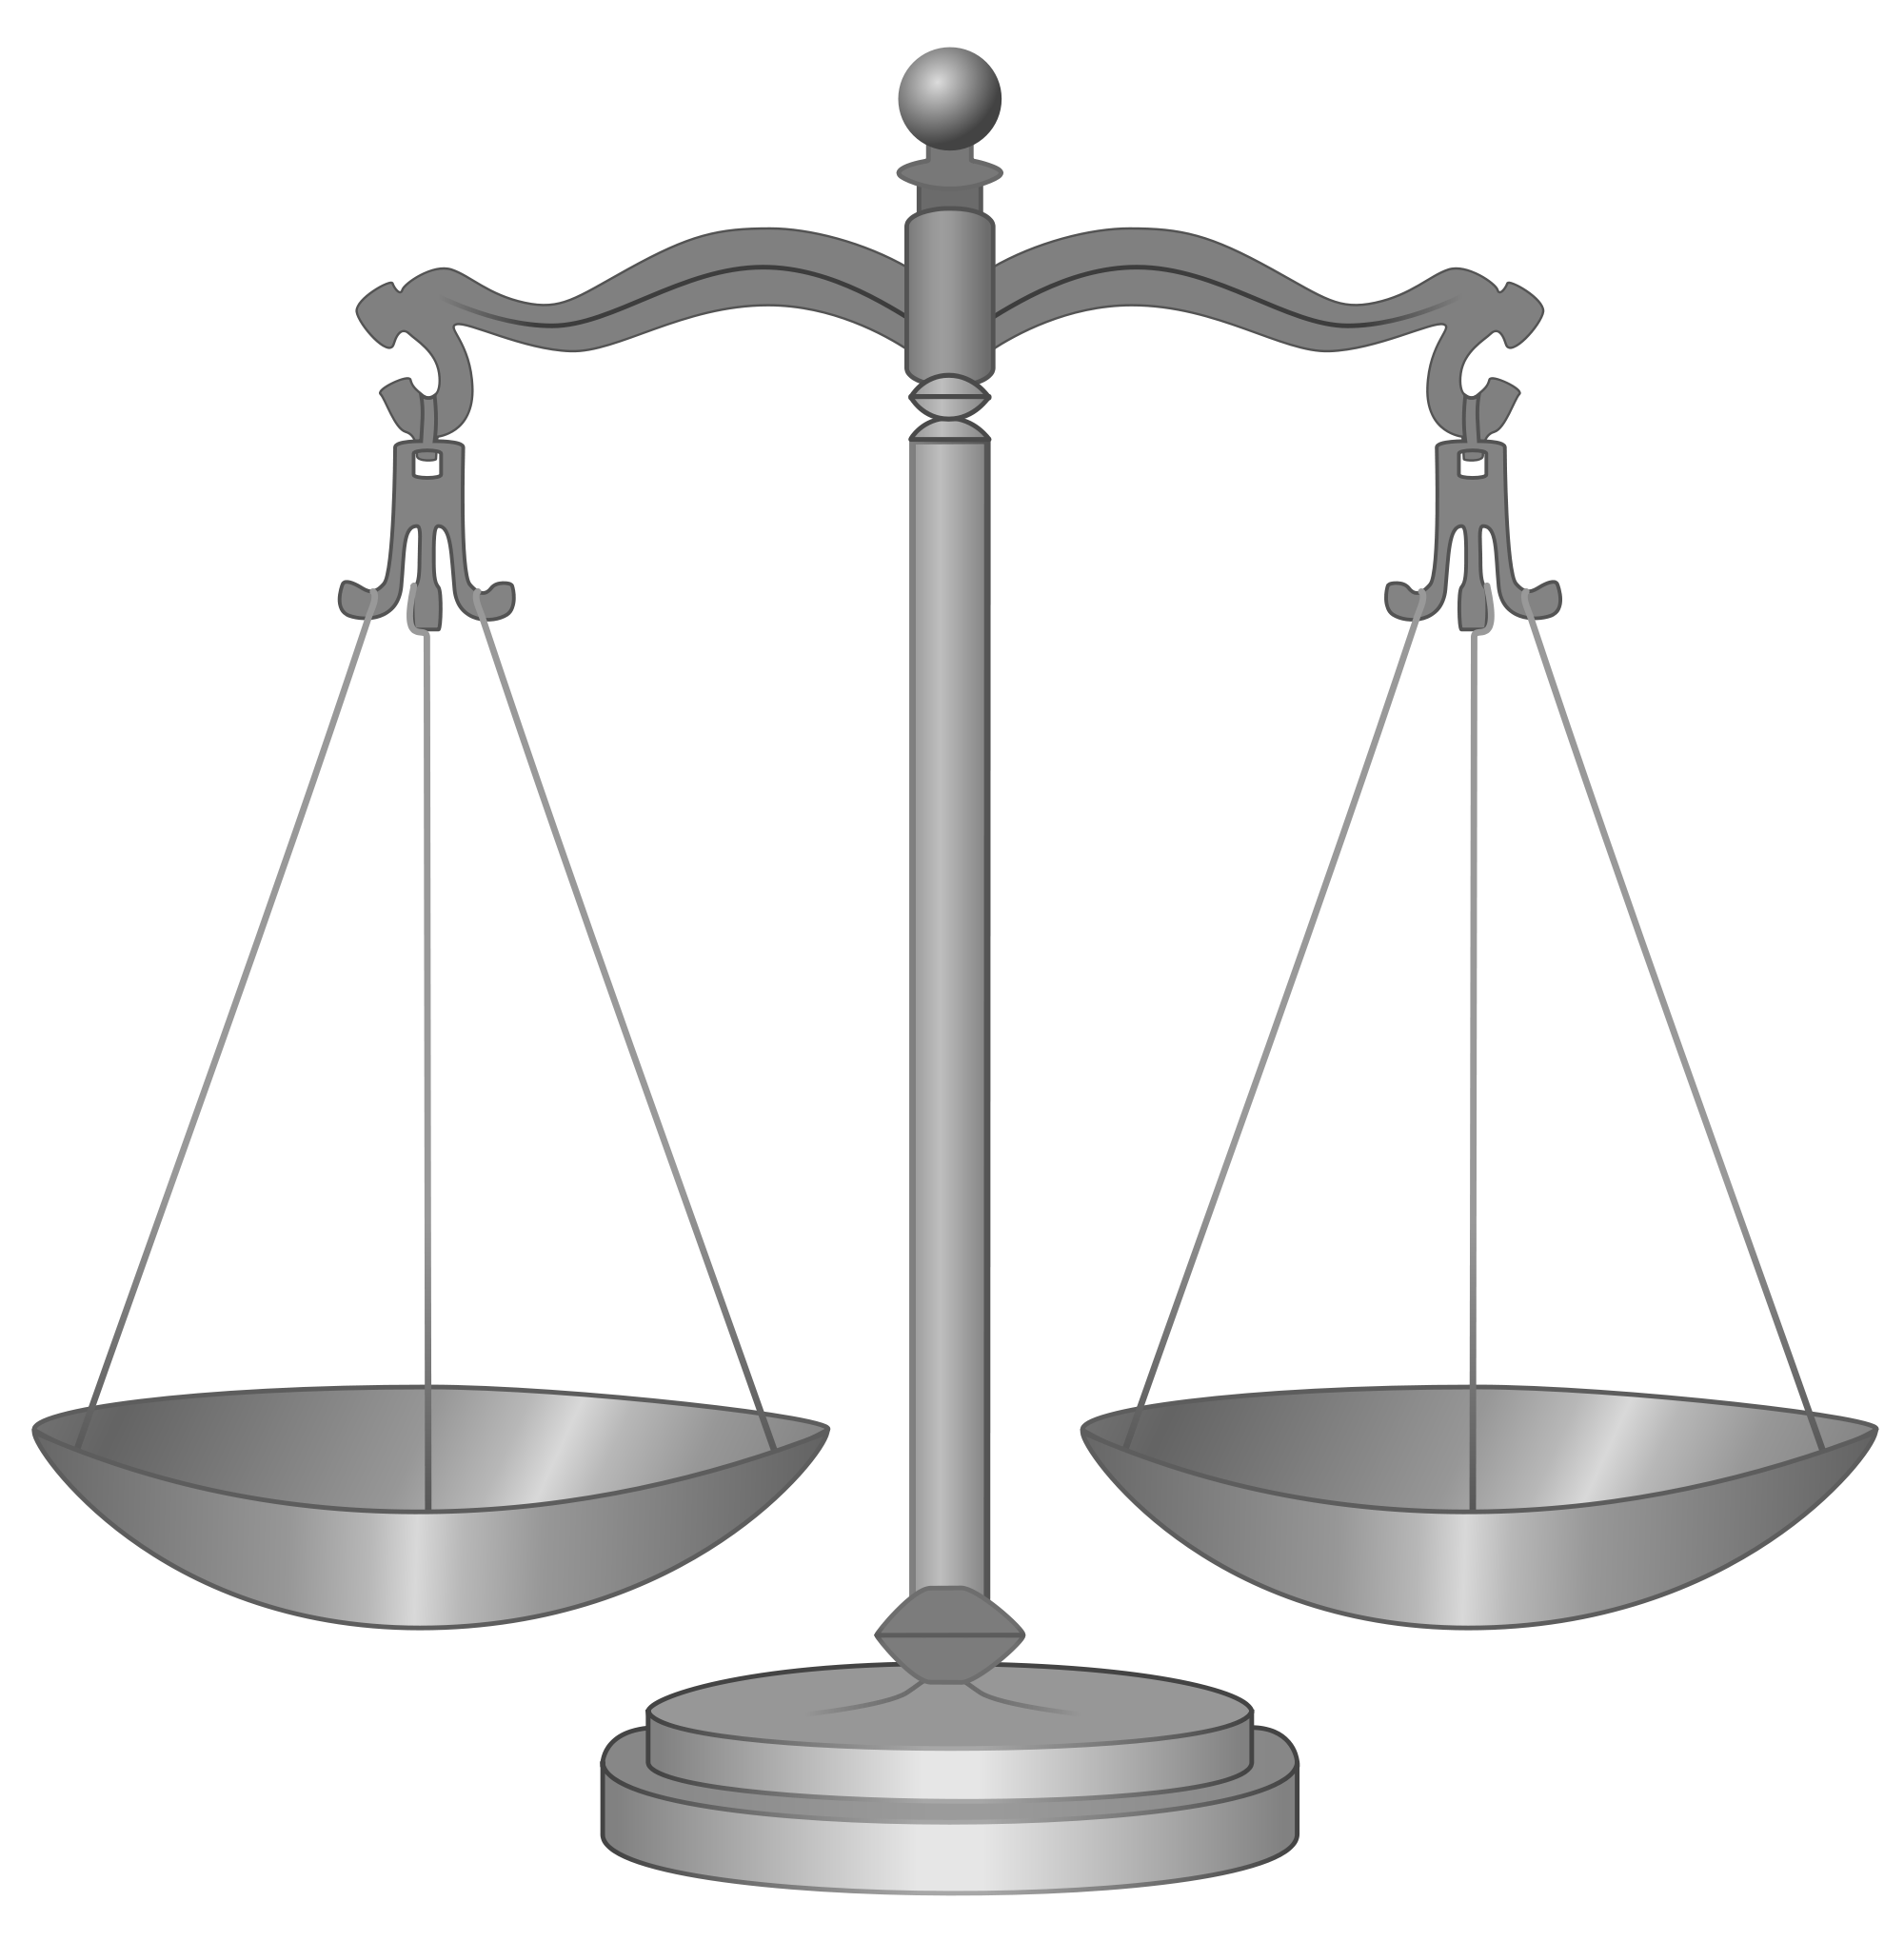 File:Scale of justice gold.pn